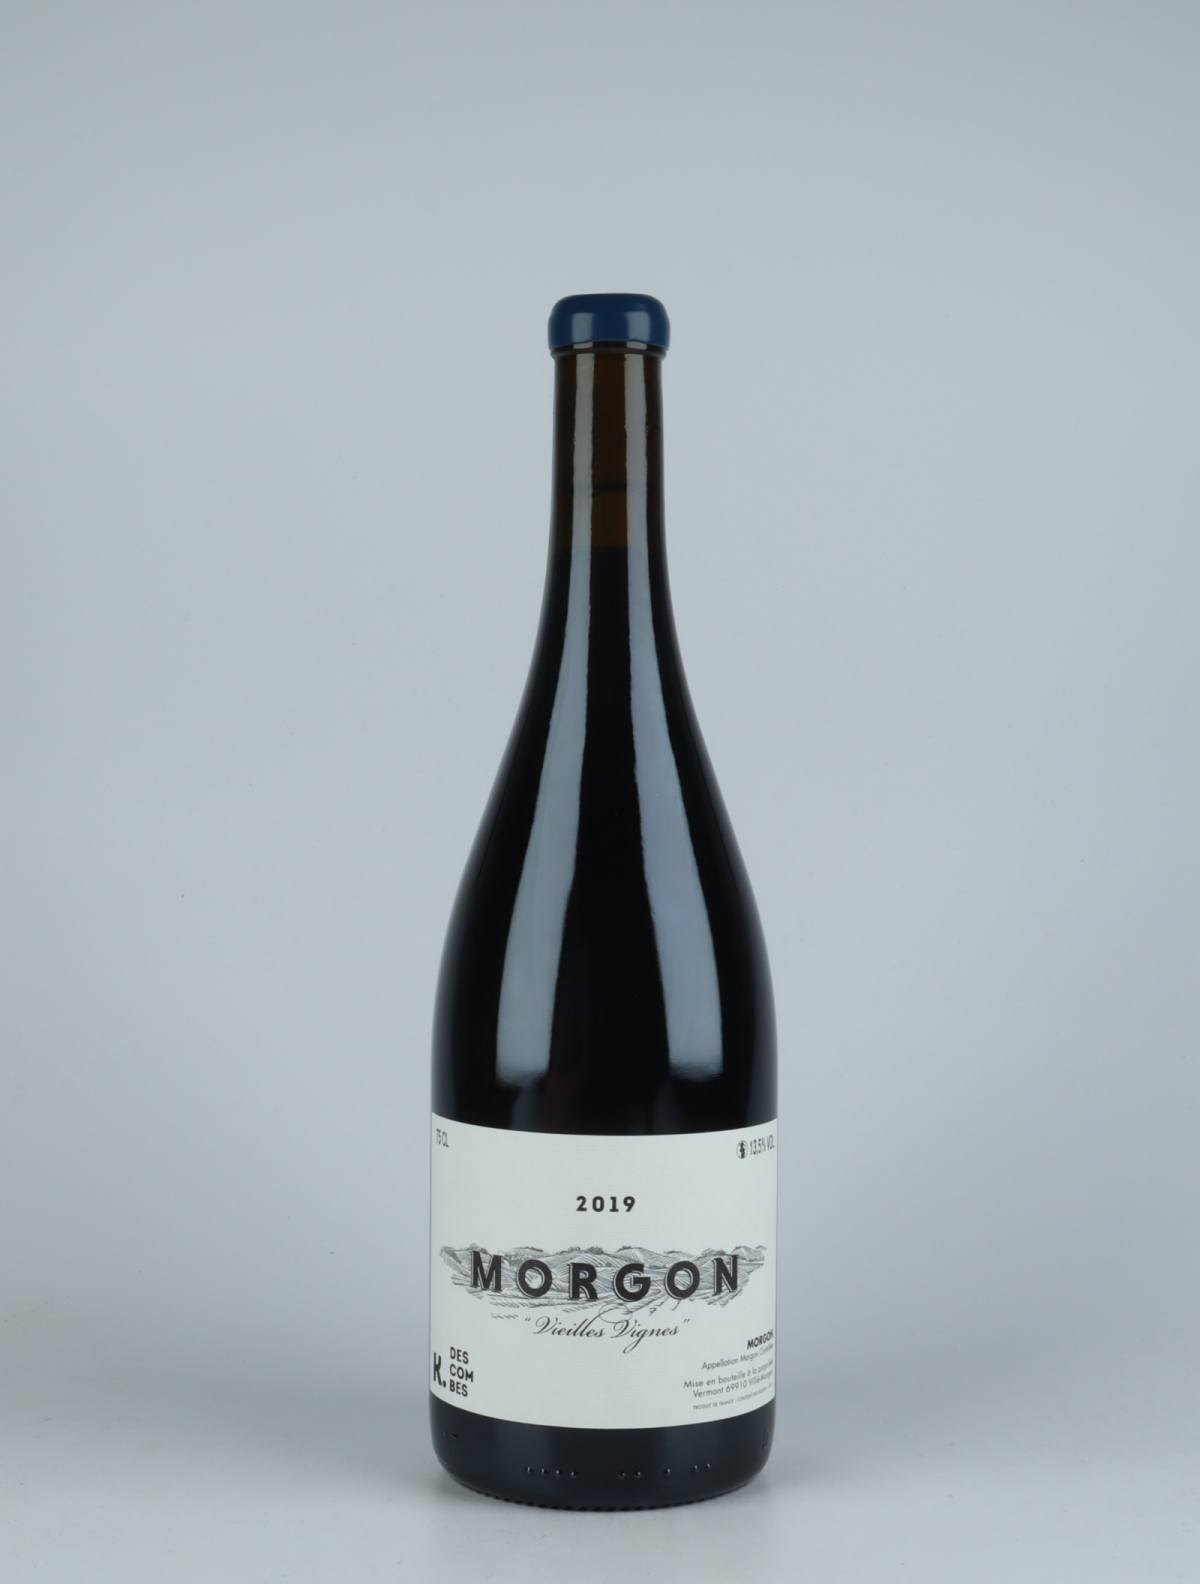 A bottle 2019 Morgon Vieilles Vignes Red wine from Kewin Descombes, Beaujolais in France